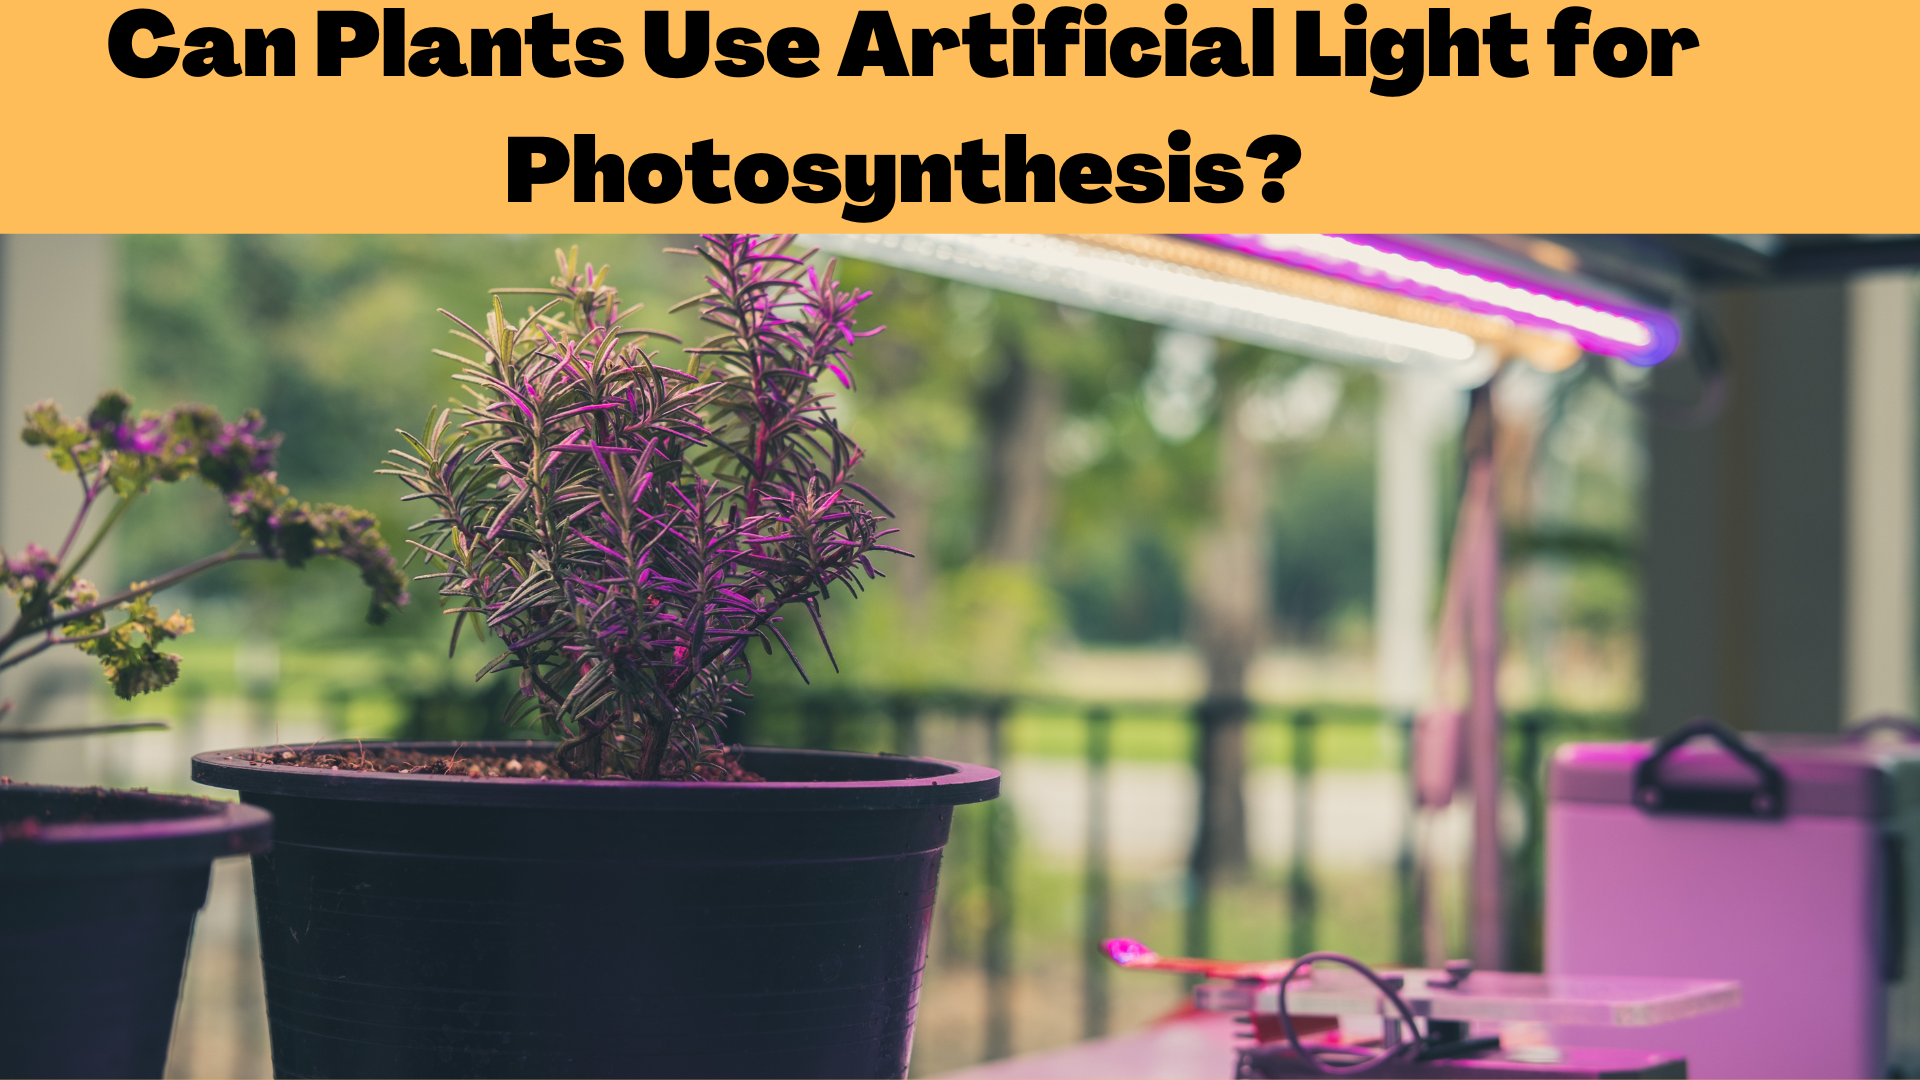 Can Plants Use Artificial Light for Photosynthesis?